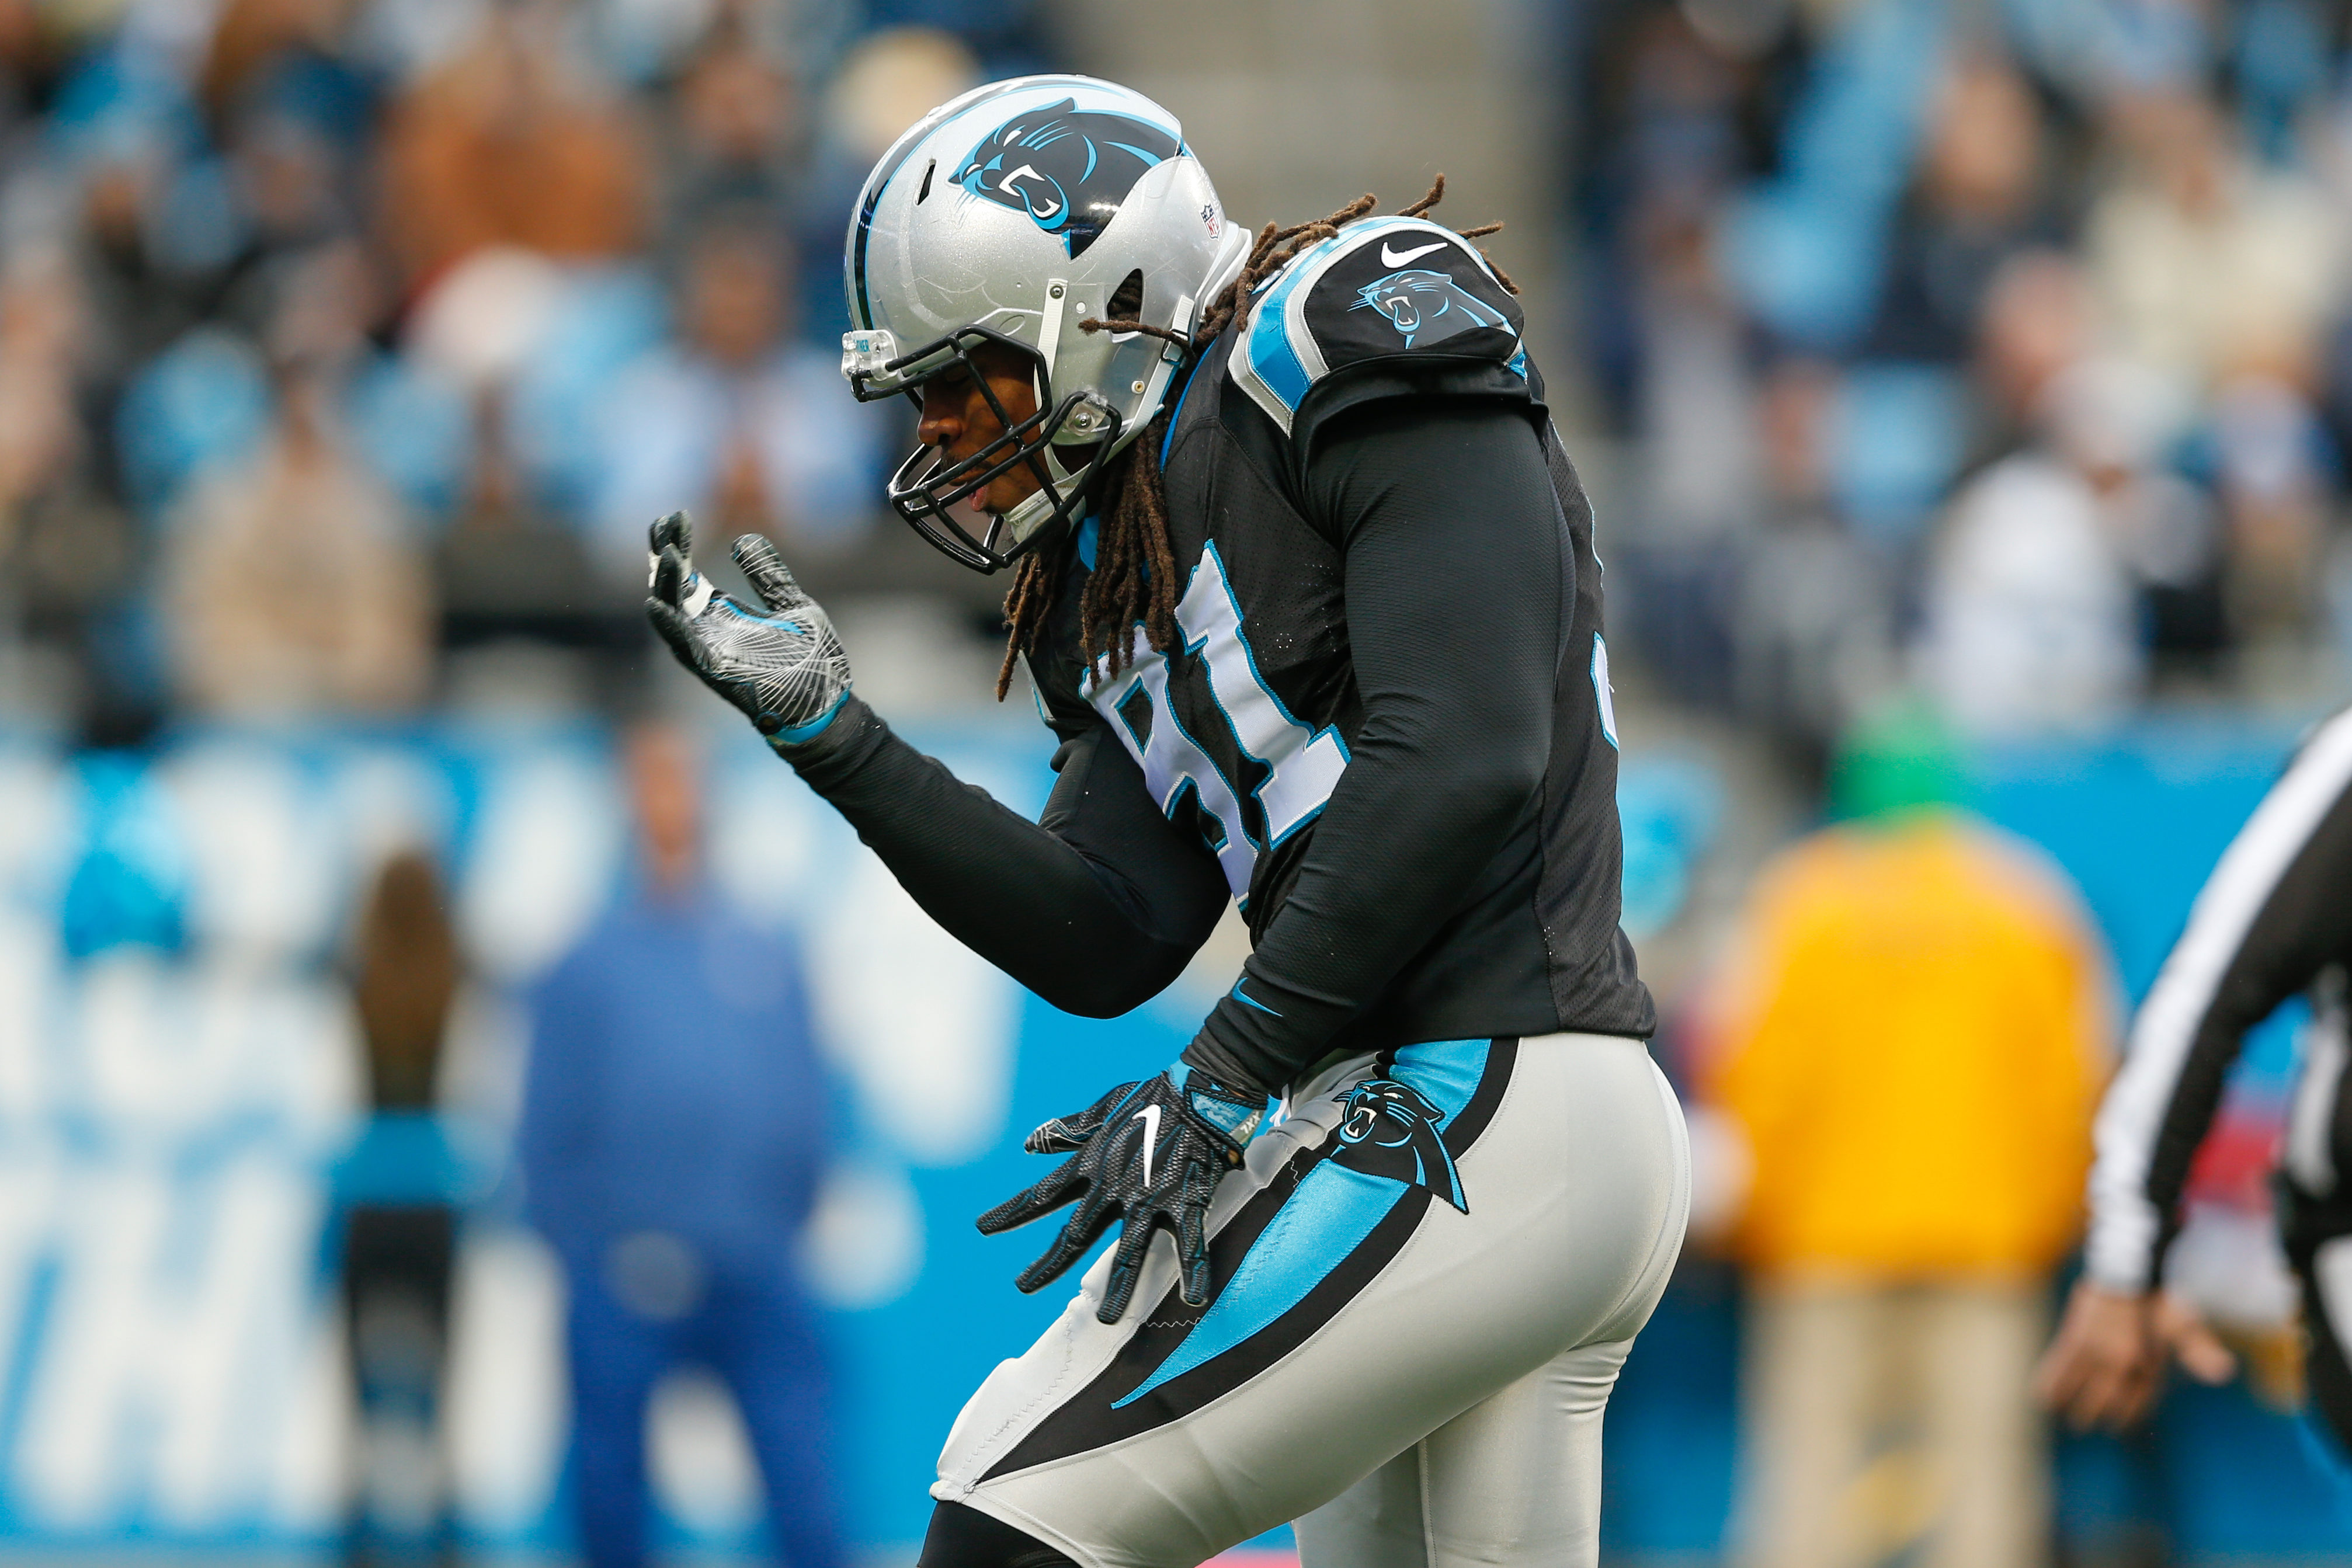 NFL: San Diego Chargers at Carolina Panthers